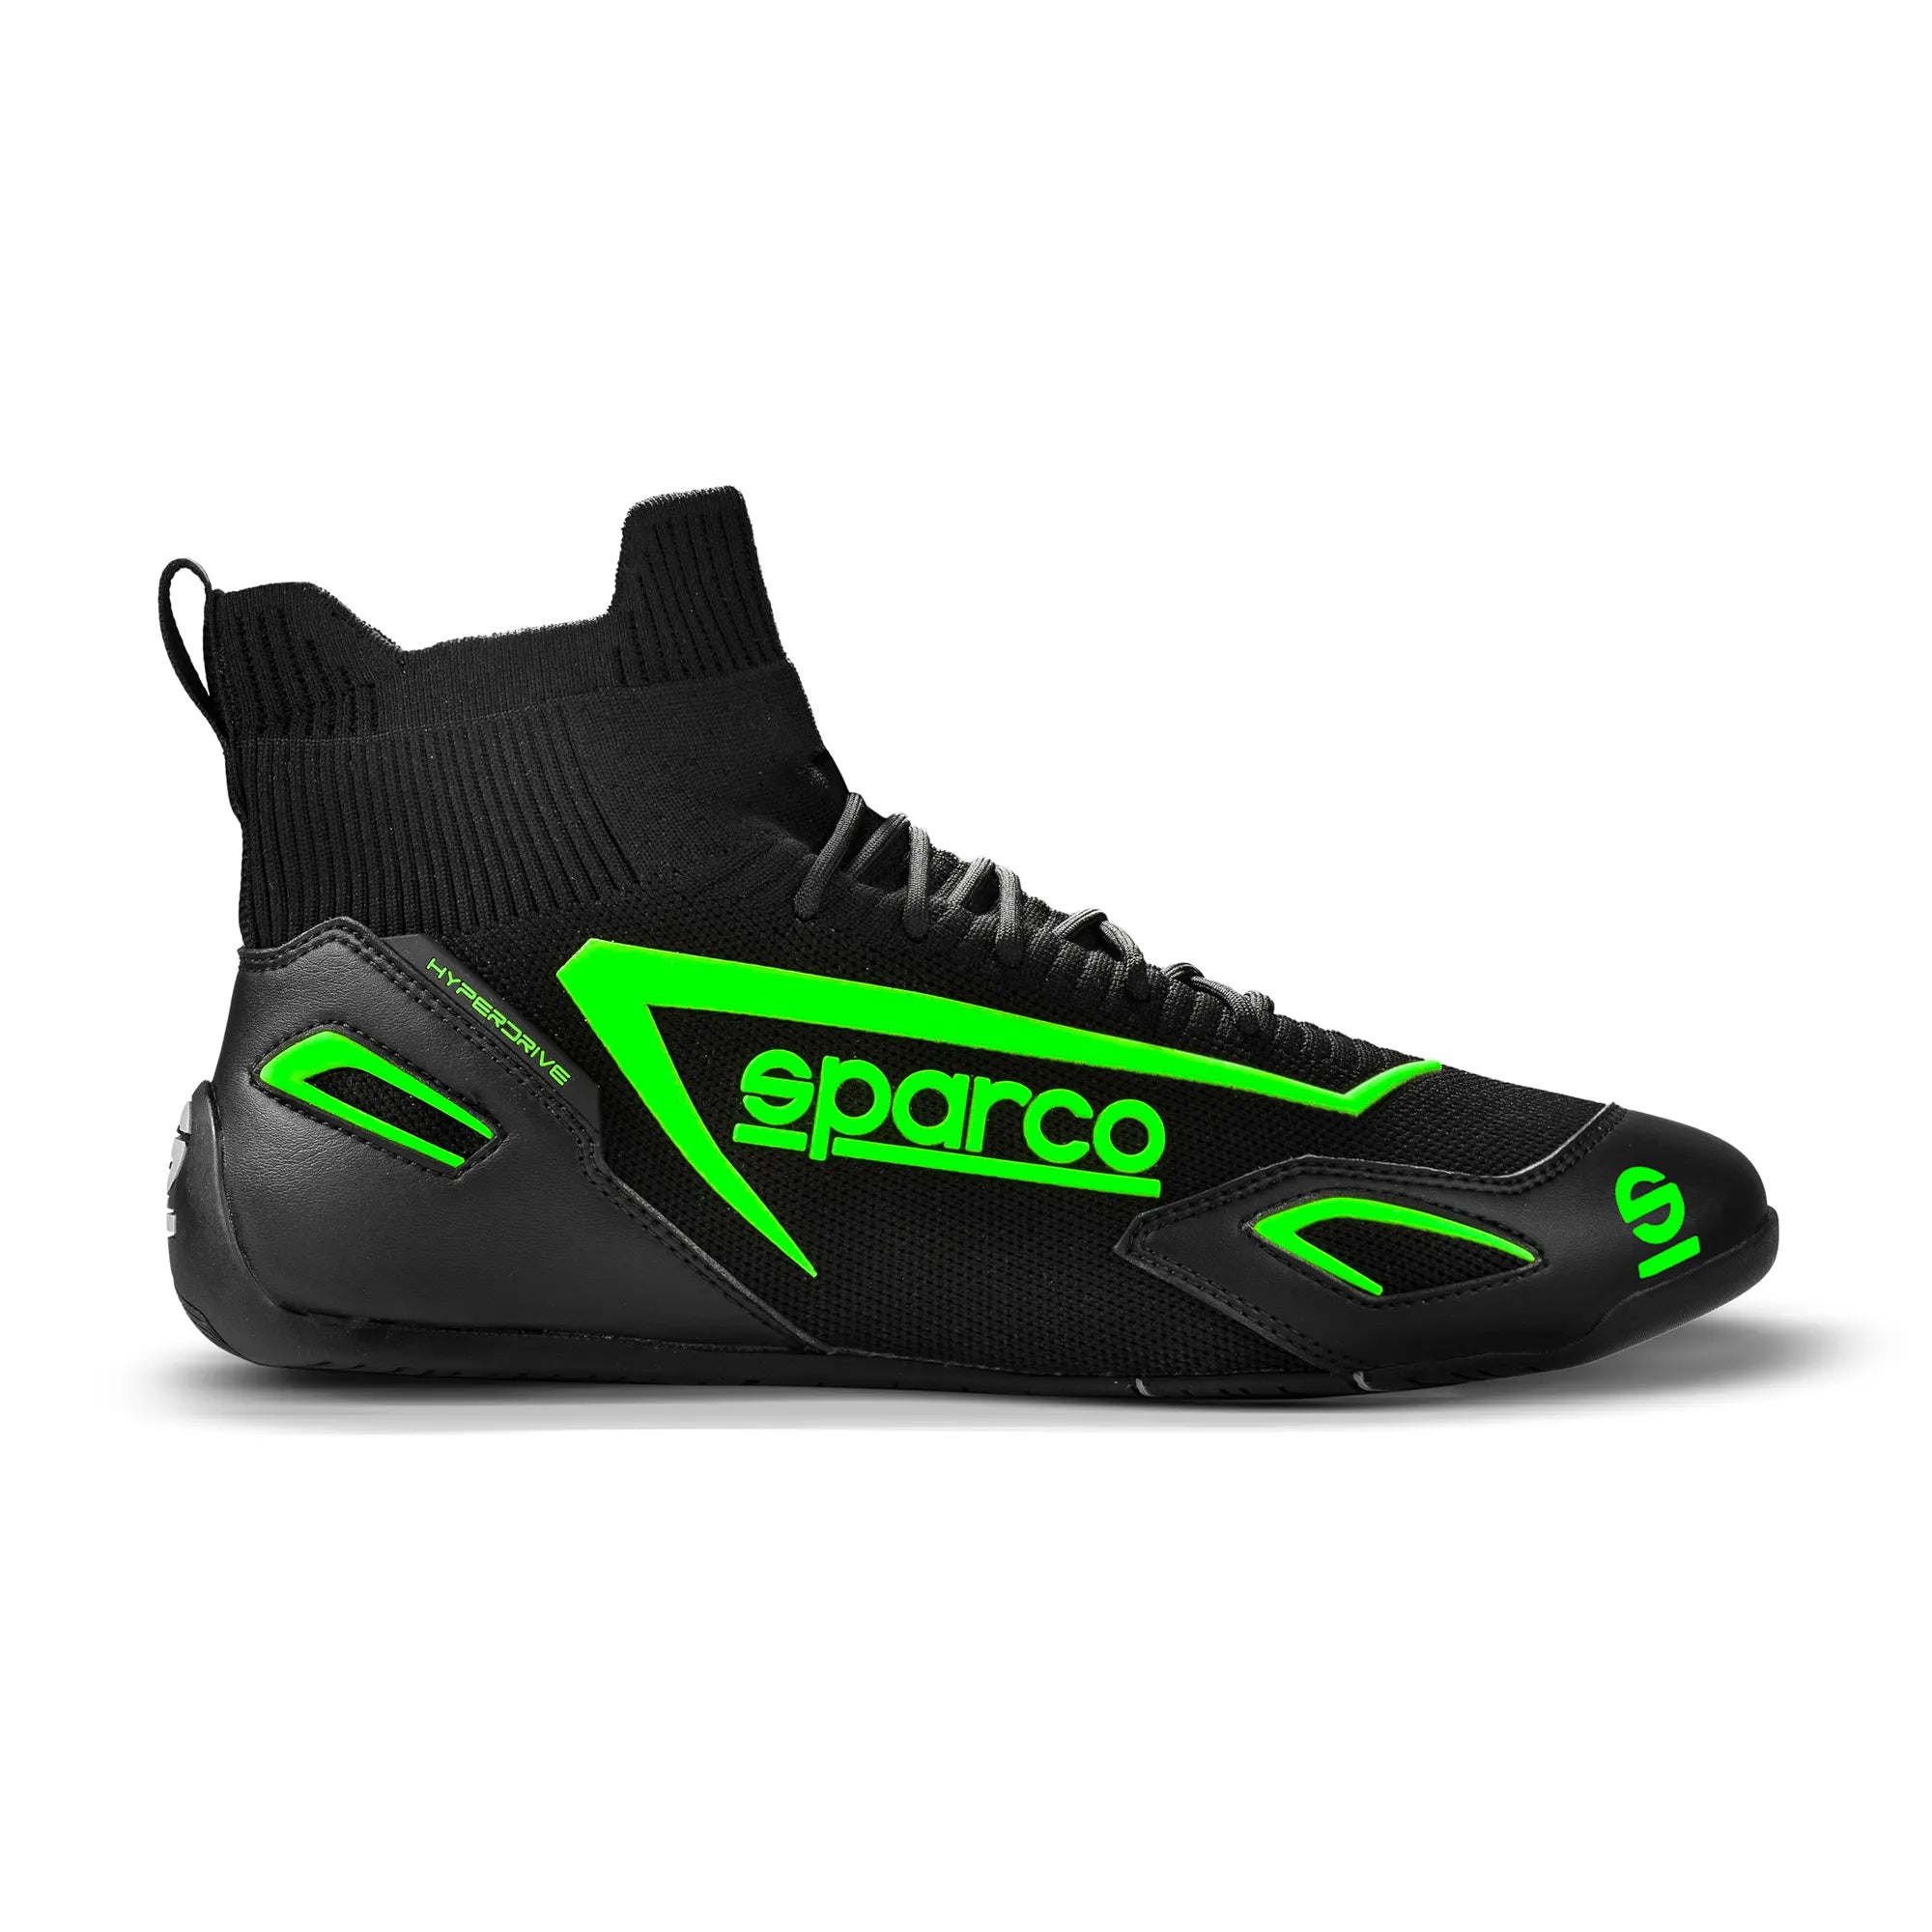 SPARCO 00129341NRVF Gaming sim racing shoes HYPERDRIVE, black/green, size 41 Photo-0 